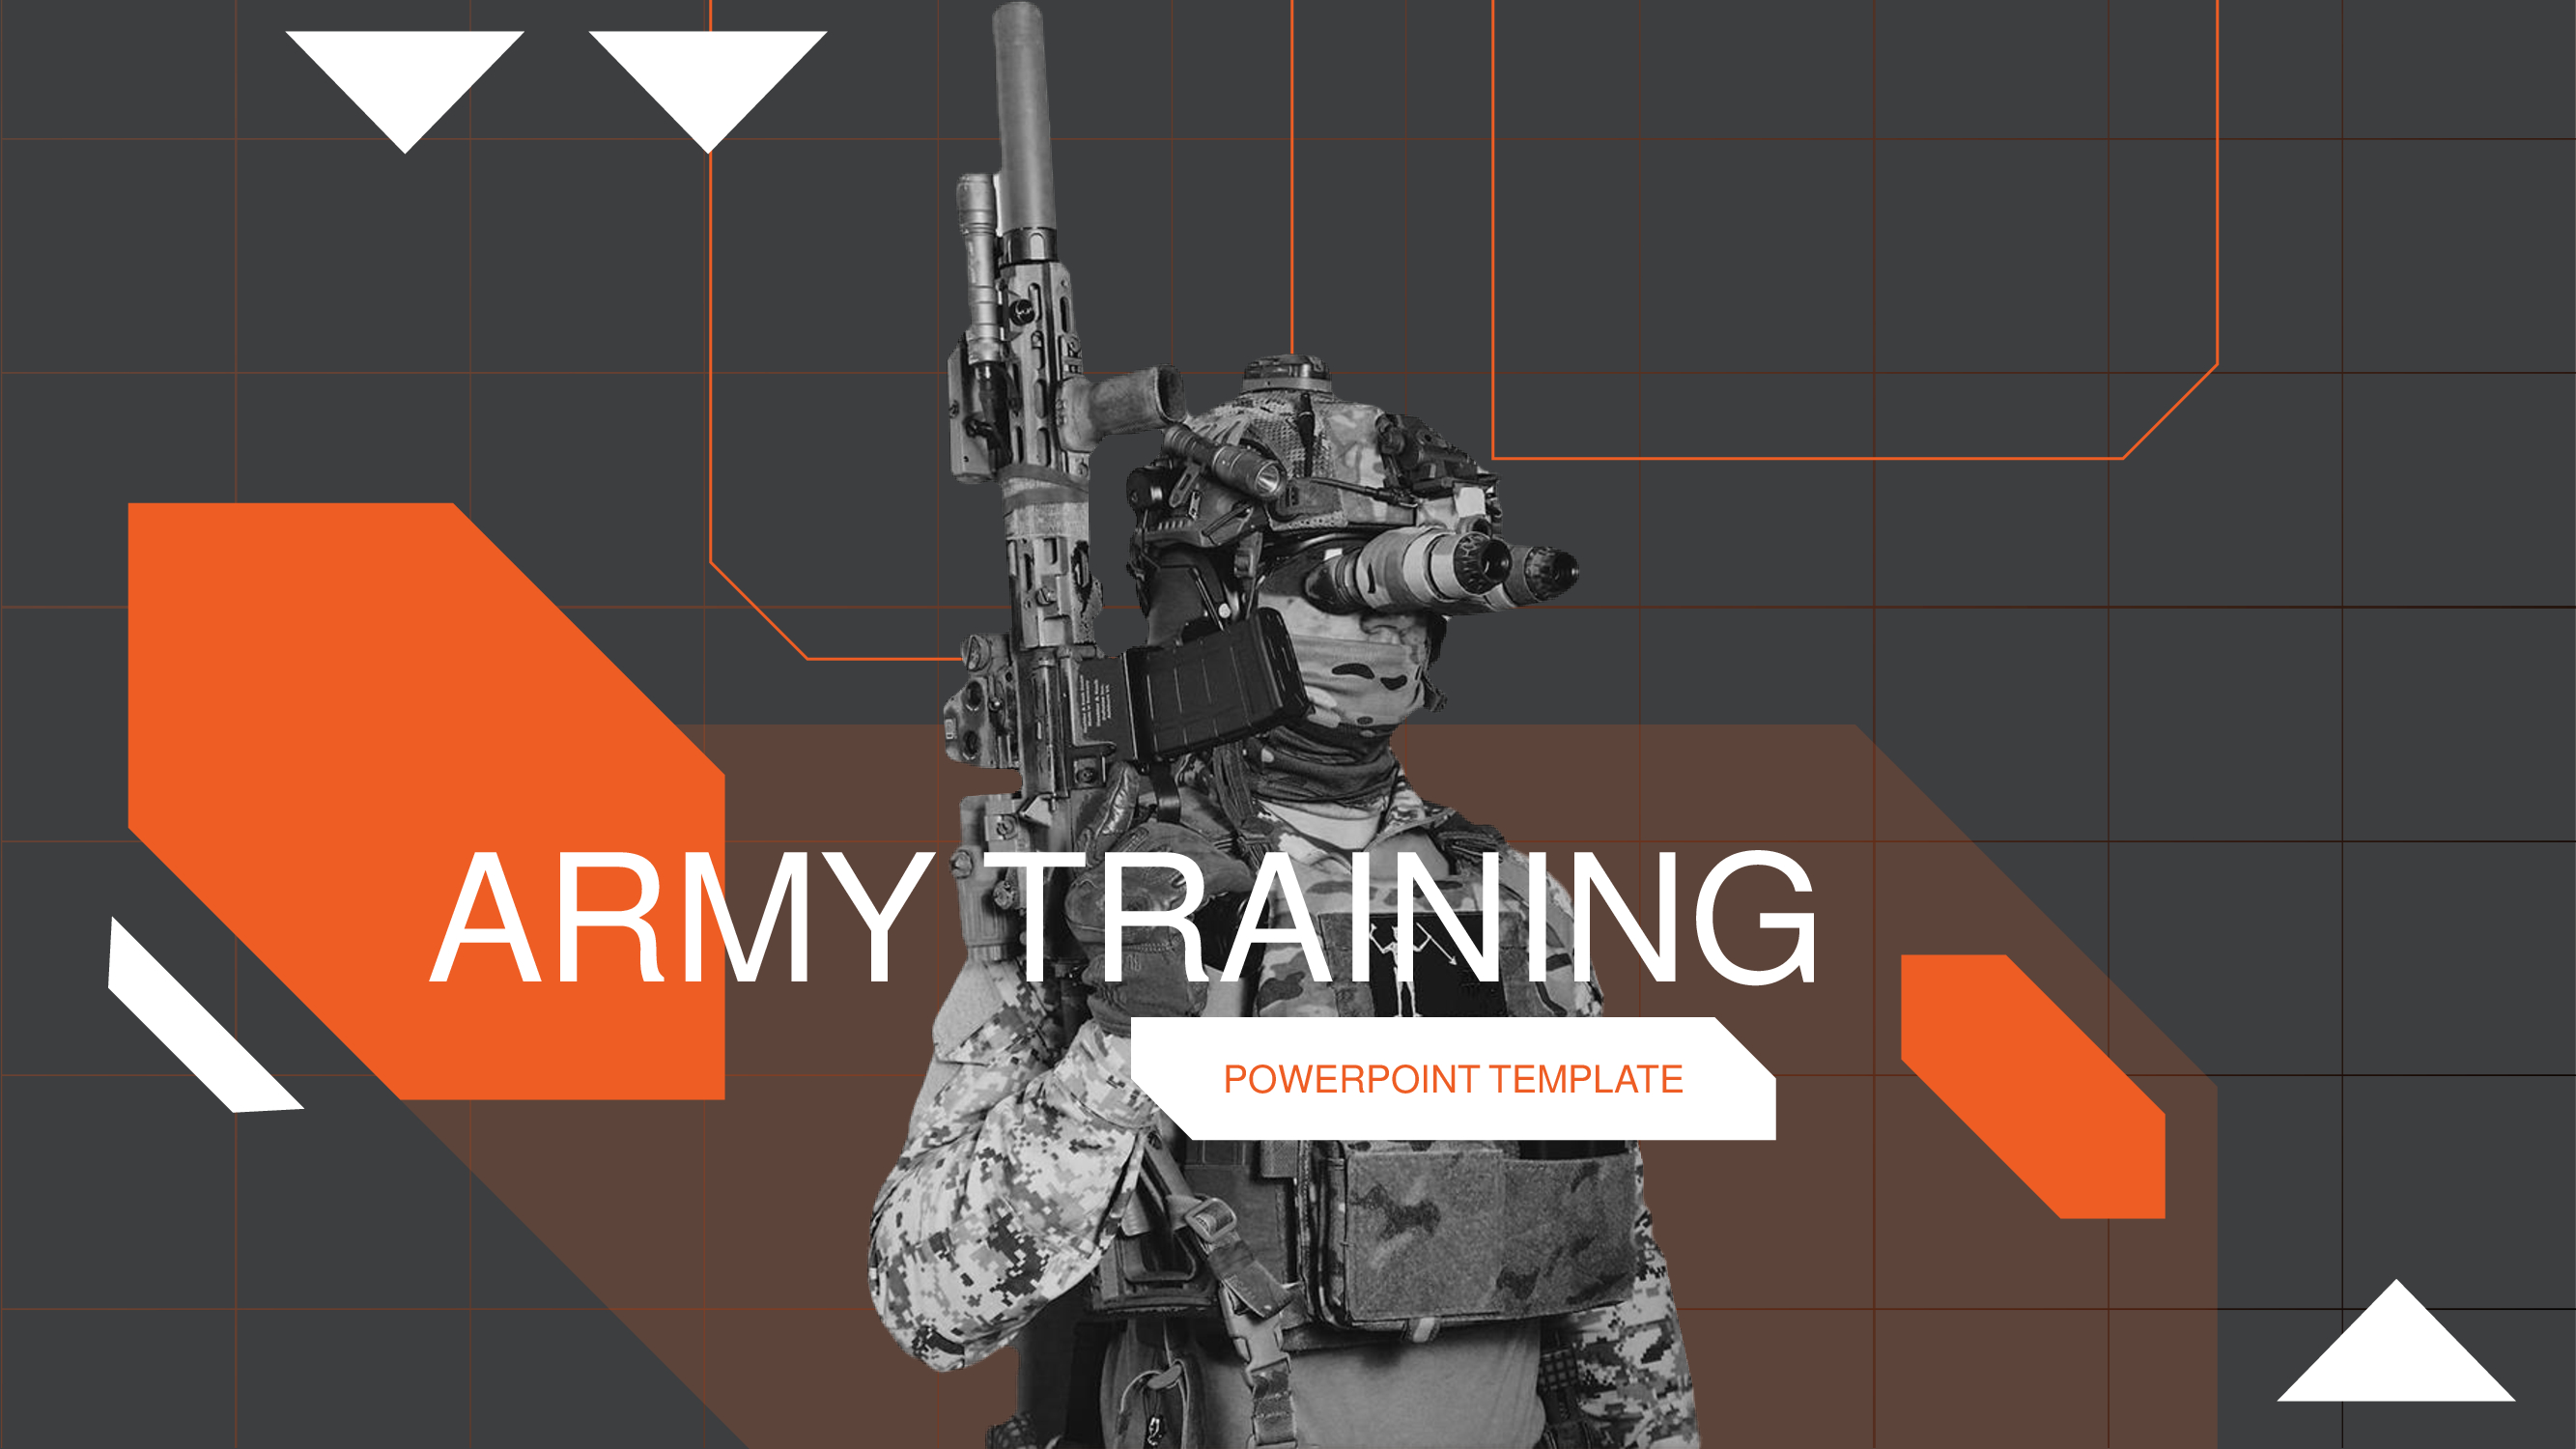 White lettering "Army training" on a gray background with army.